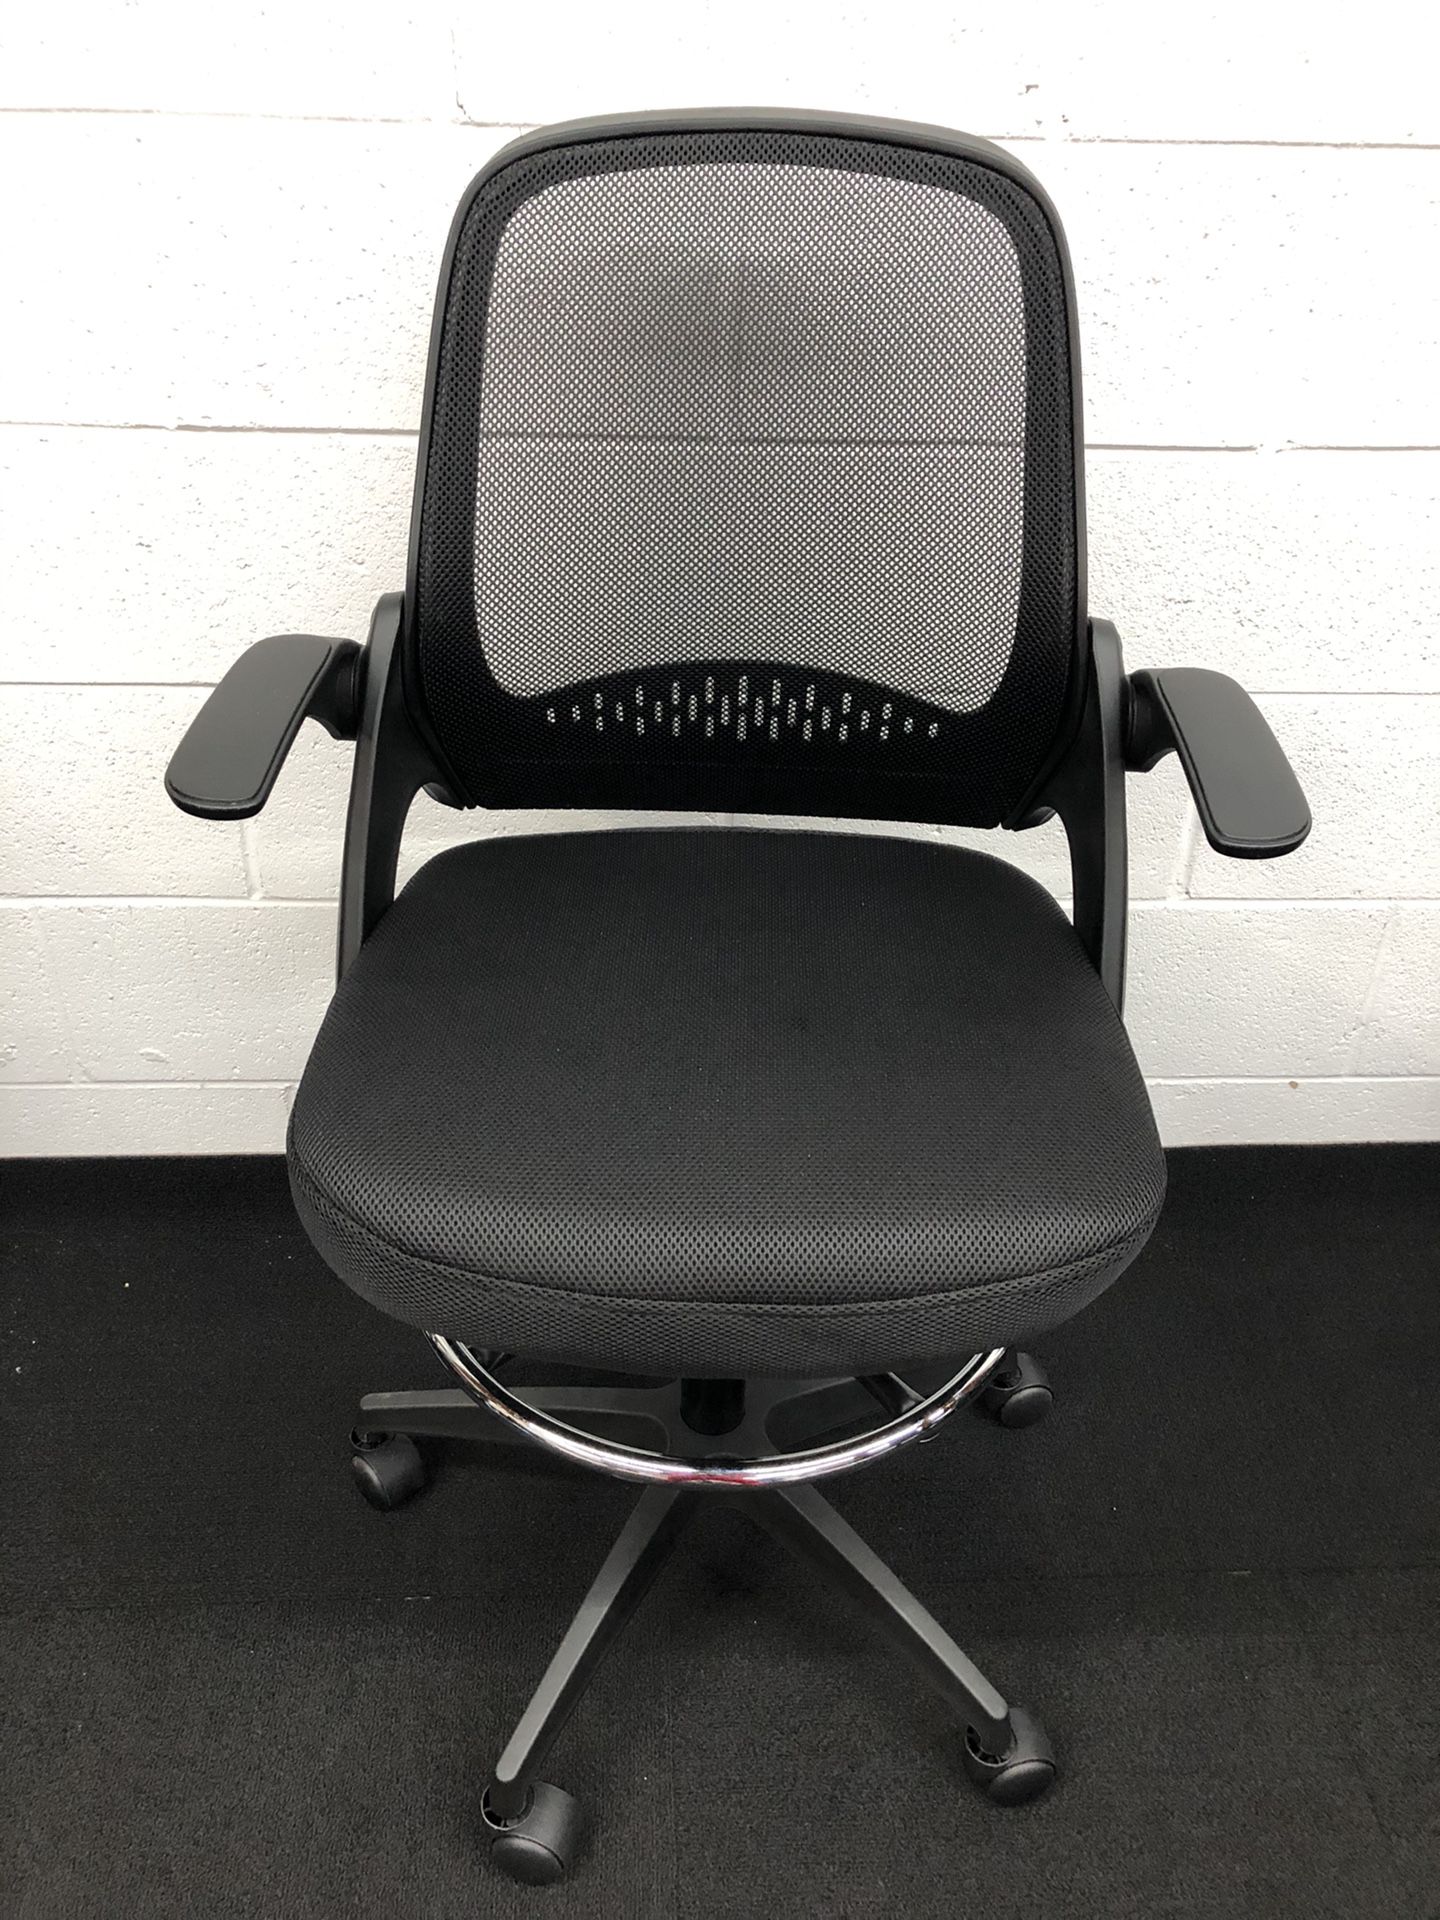 BRAND NEW BLACK ADJUSTABLE DRAFTING CHAIR WITH ADJUSTABLE ARMS